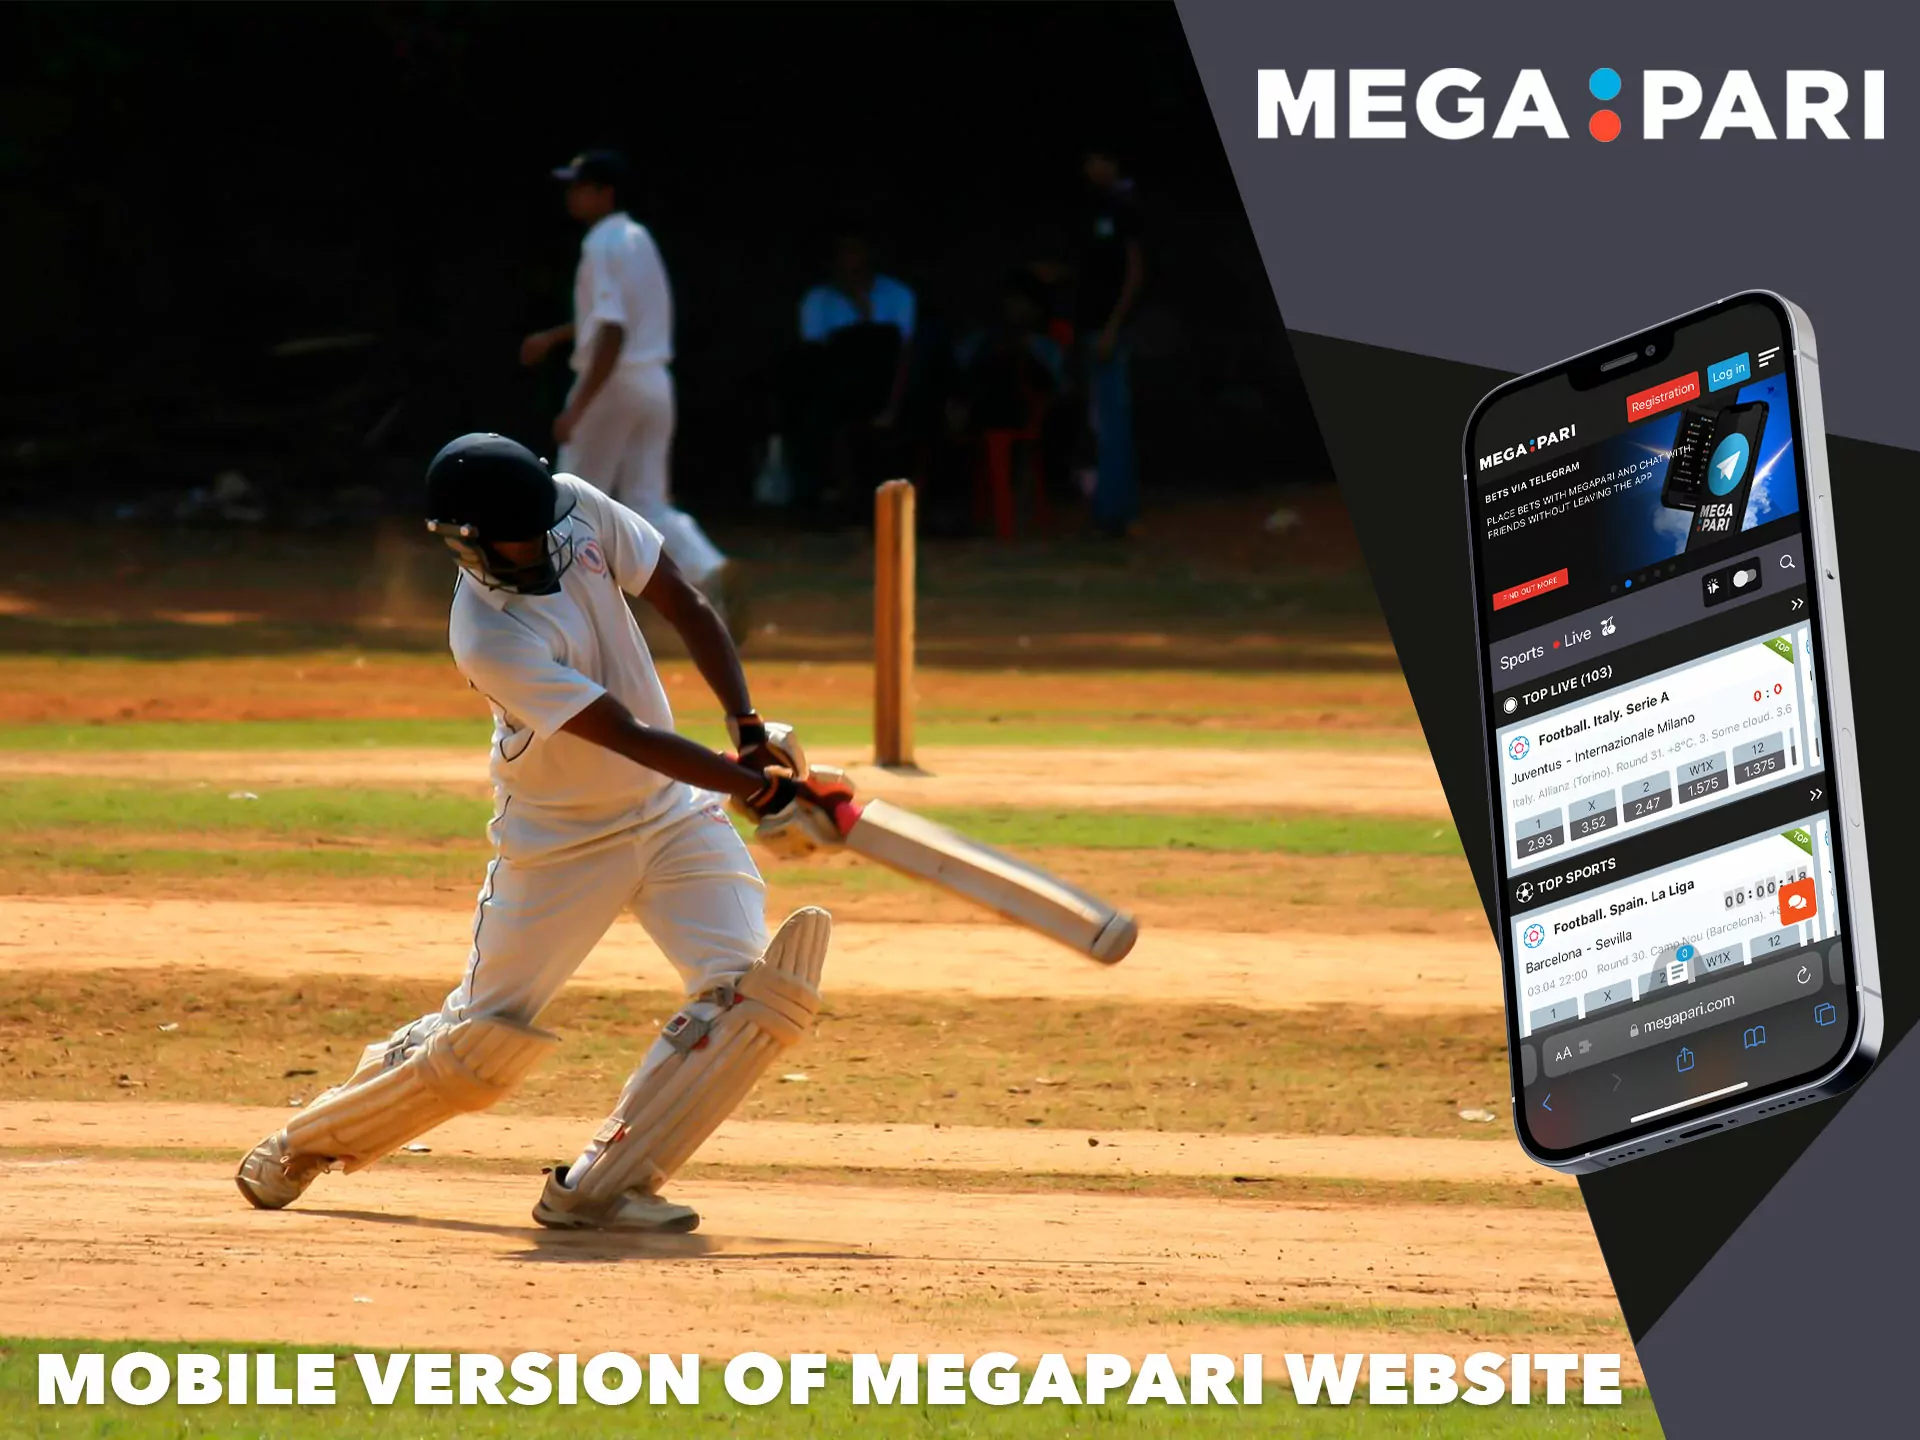 If you do not have the opportunity to download the Megapari application, then you can use the browser version directly on your smartphone.